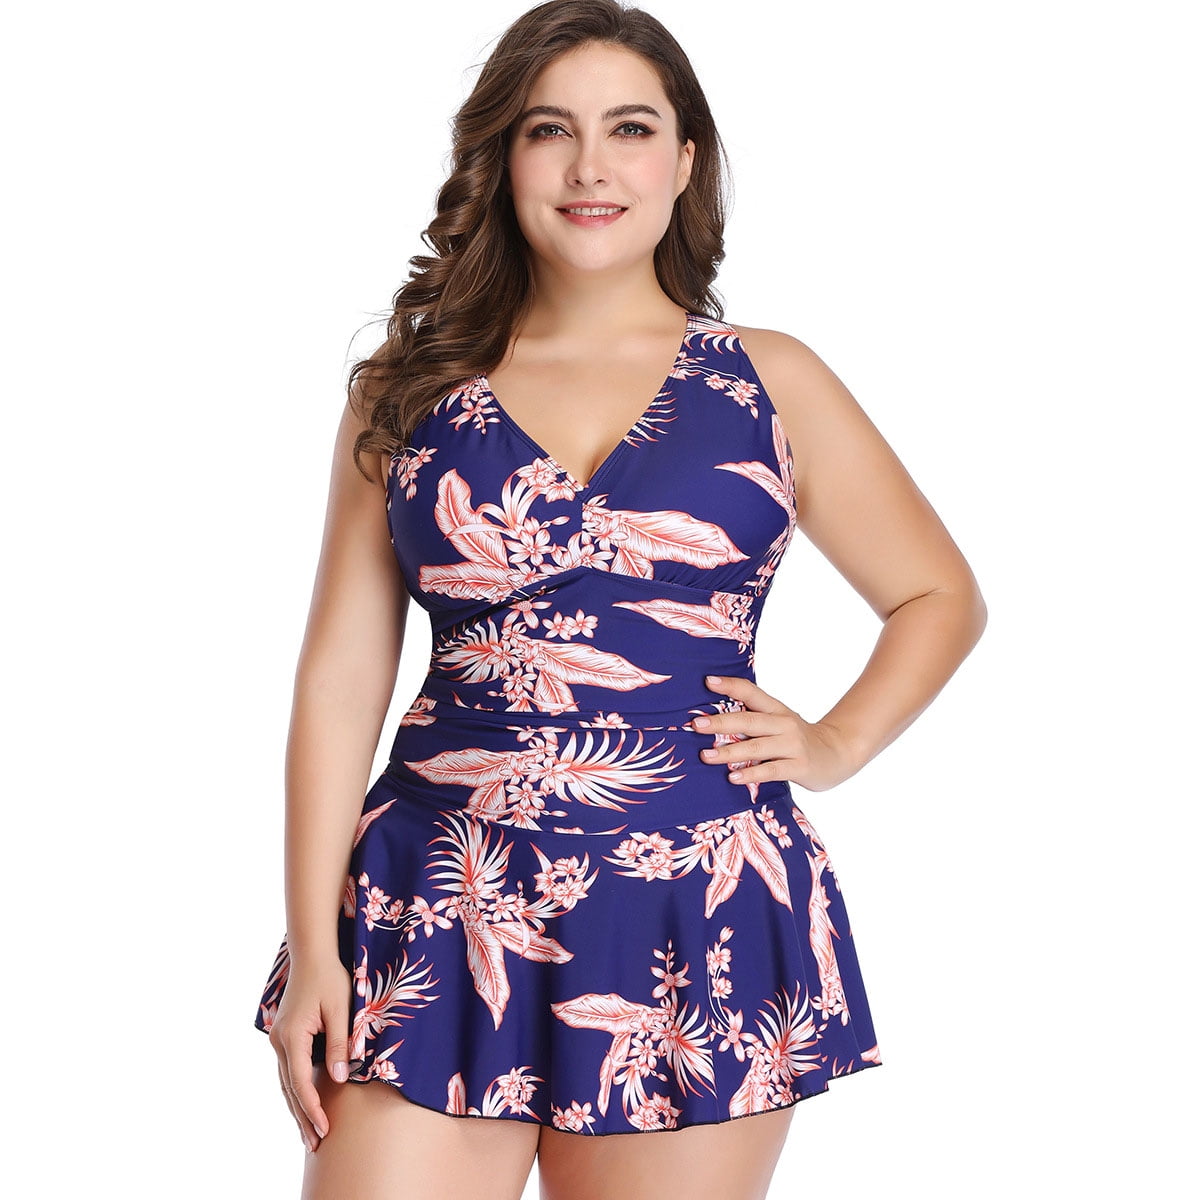 Plus Size Bathing Suits for Women Two Piece Swimsuits Skirted Swimdress Tummy Control Vintage Swimwear Tankini Swimming Suit